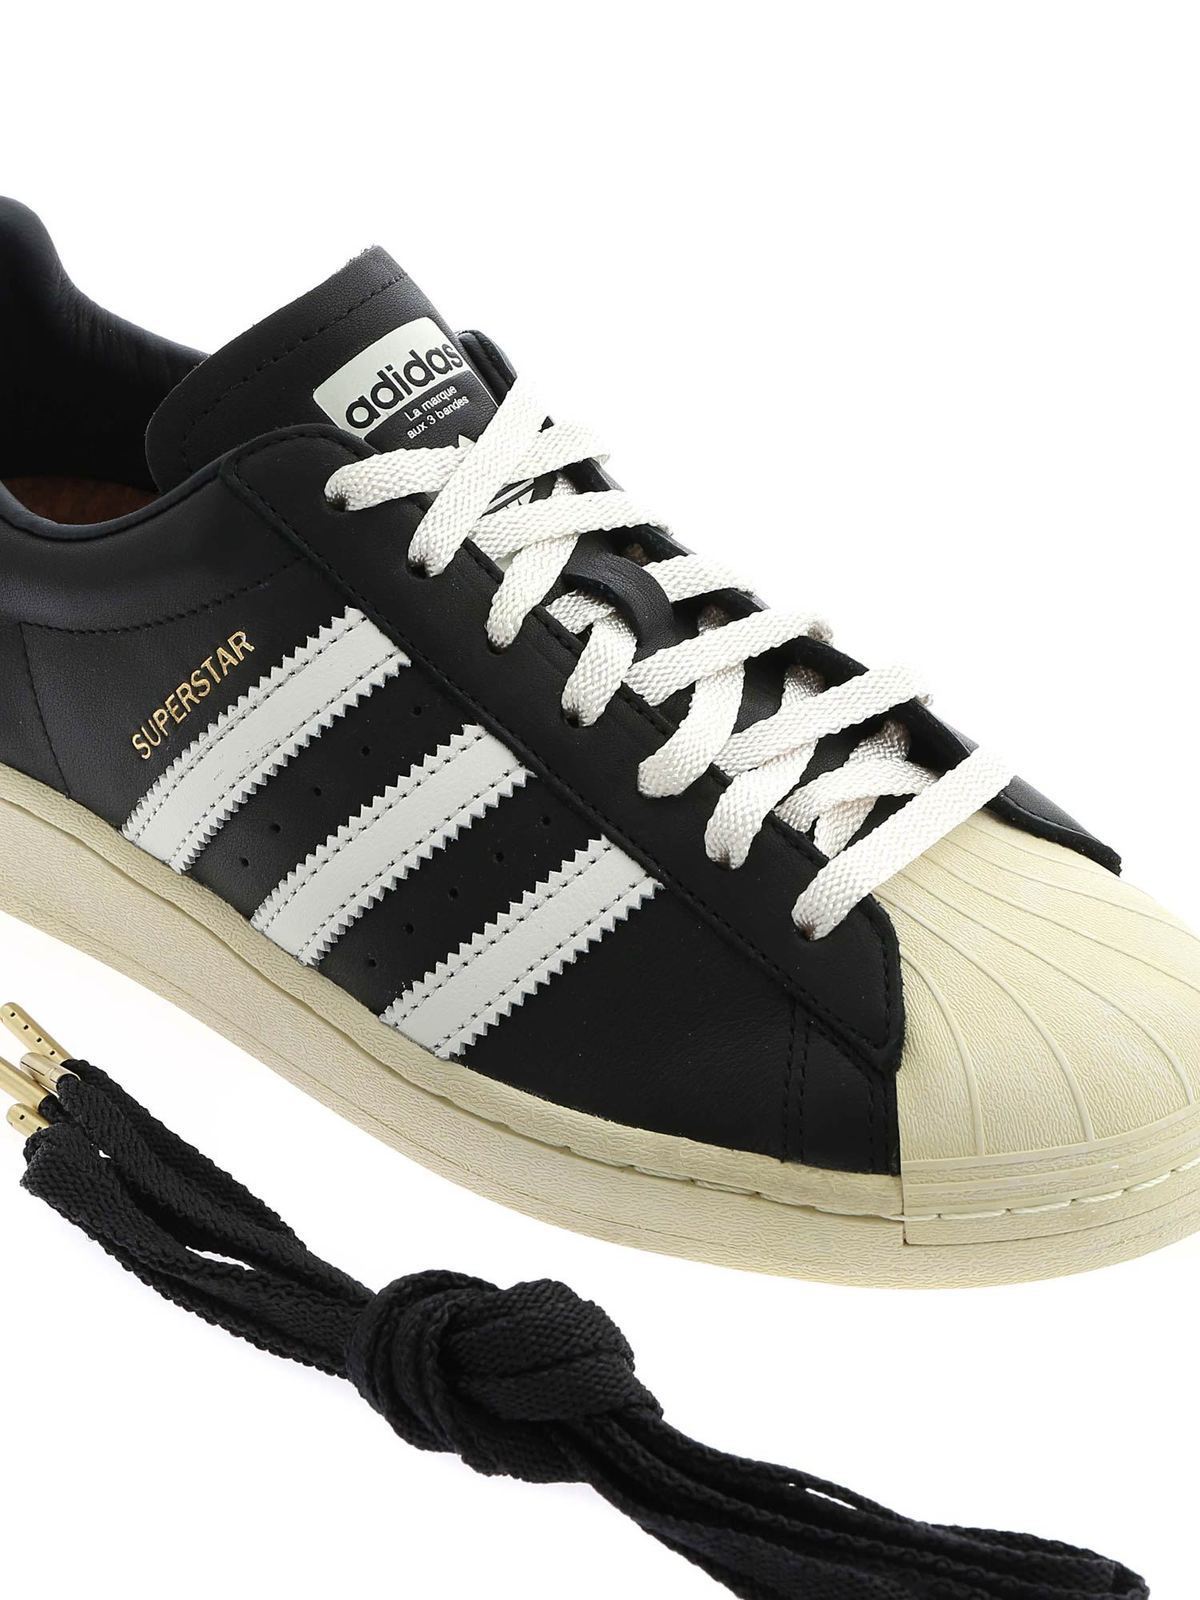 Sneakers Adidas Originals - Sneakers Superstar nere e bianche - FV2832